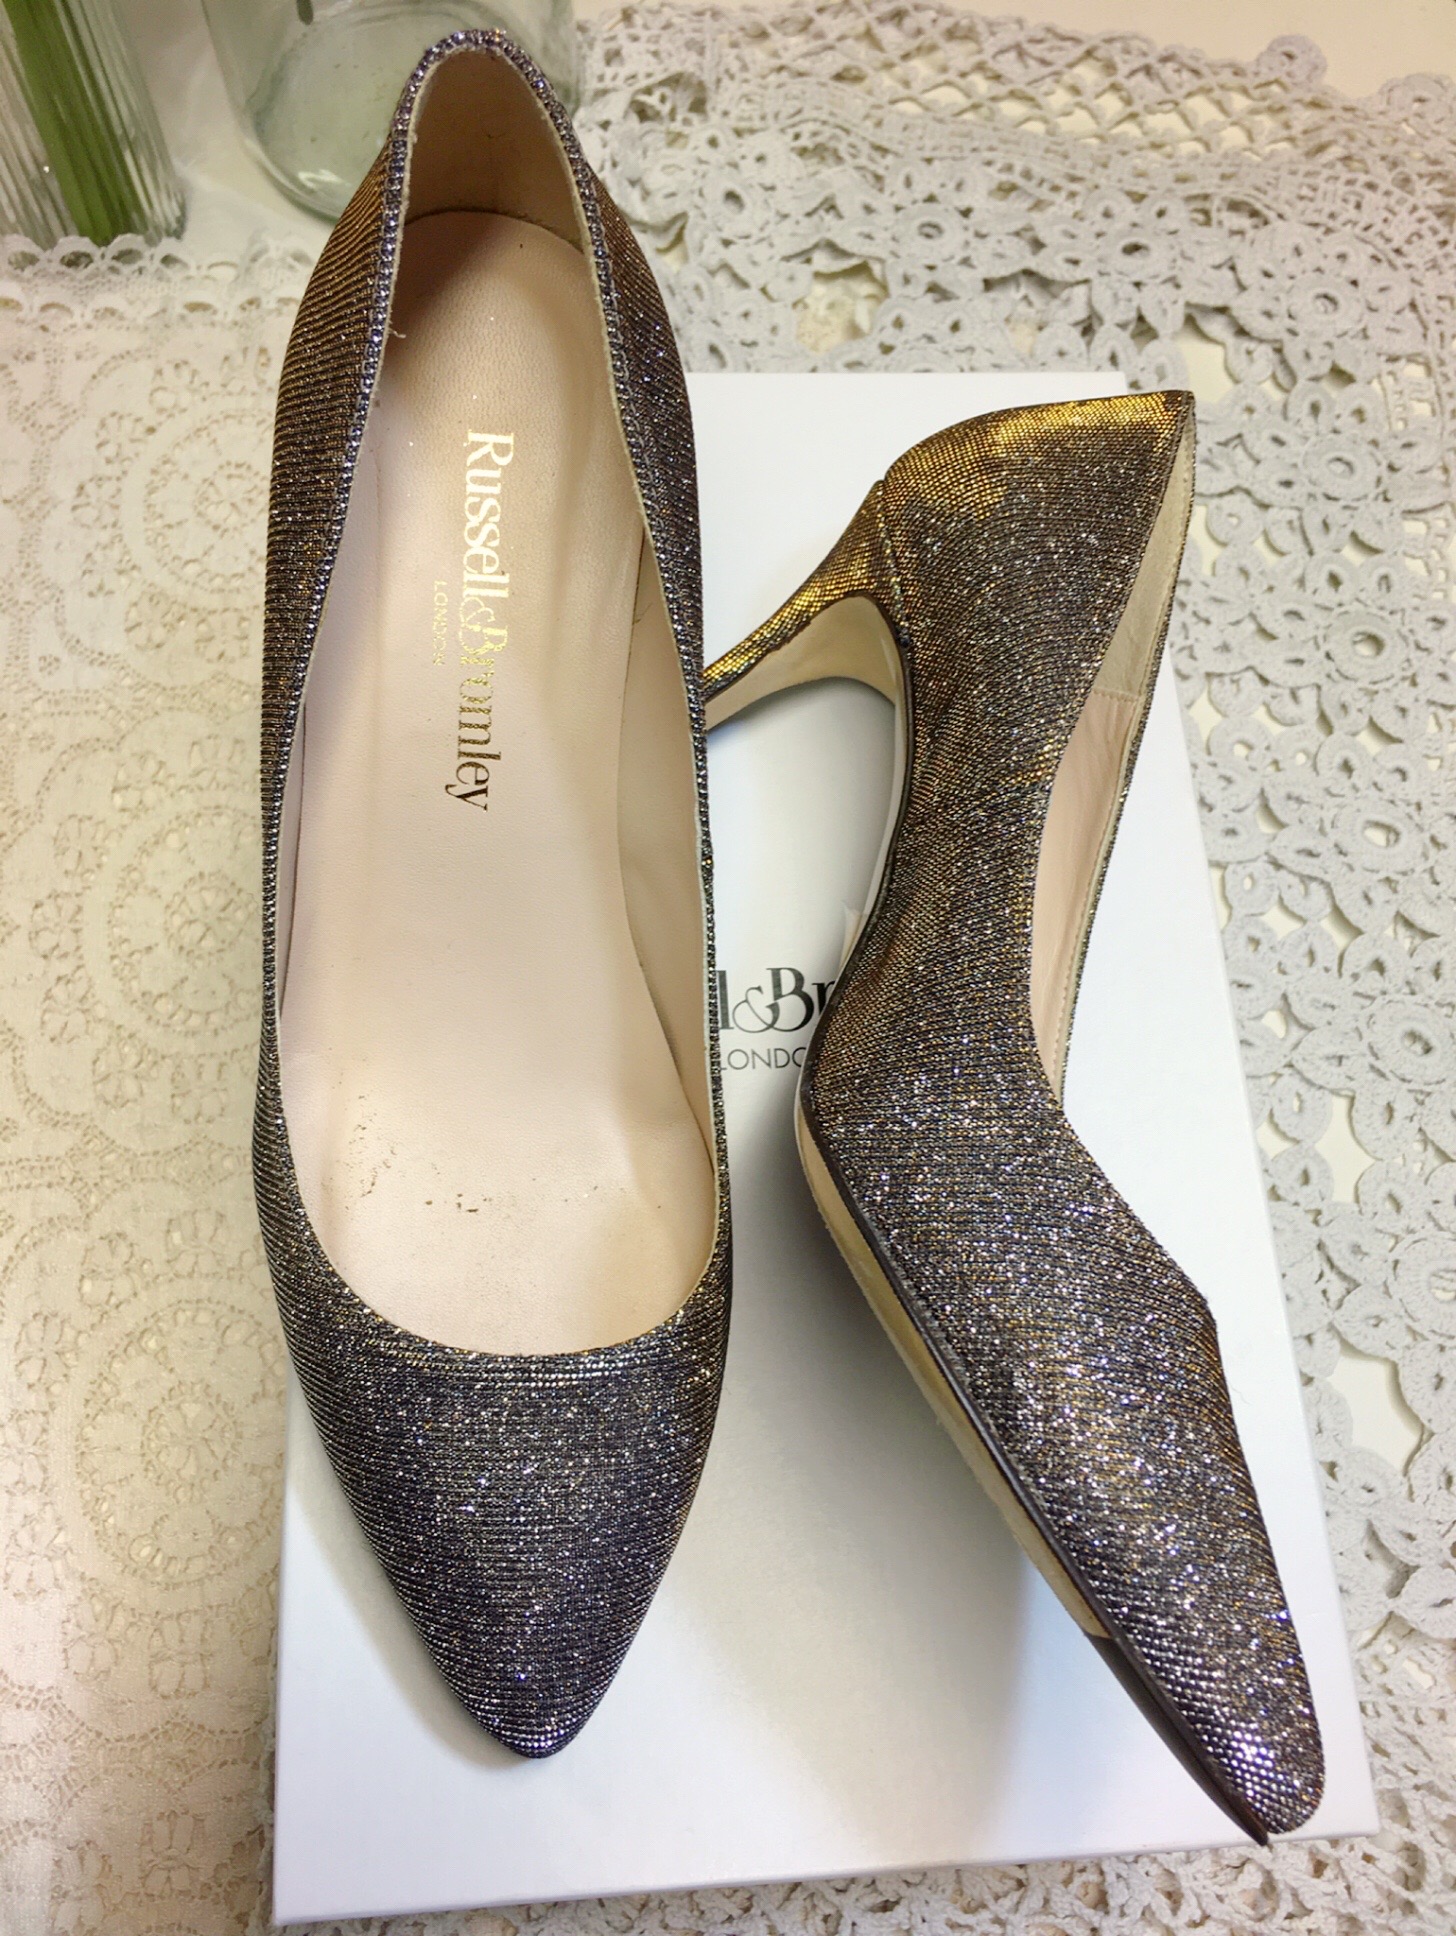 Russell & Bromley heels - Flutterby's Boutique